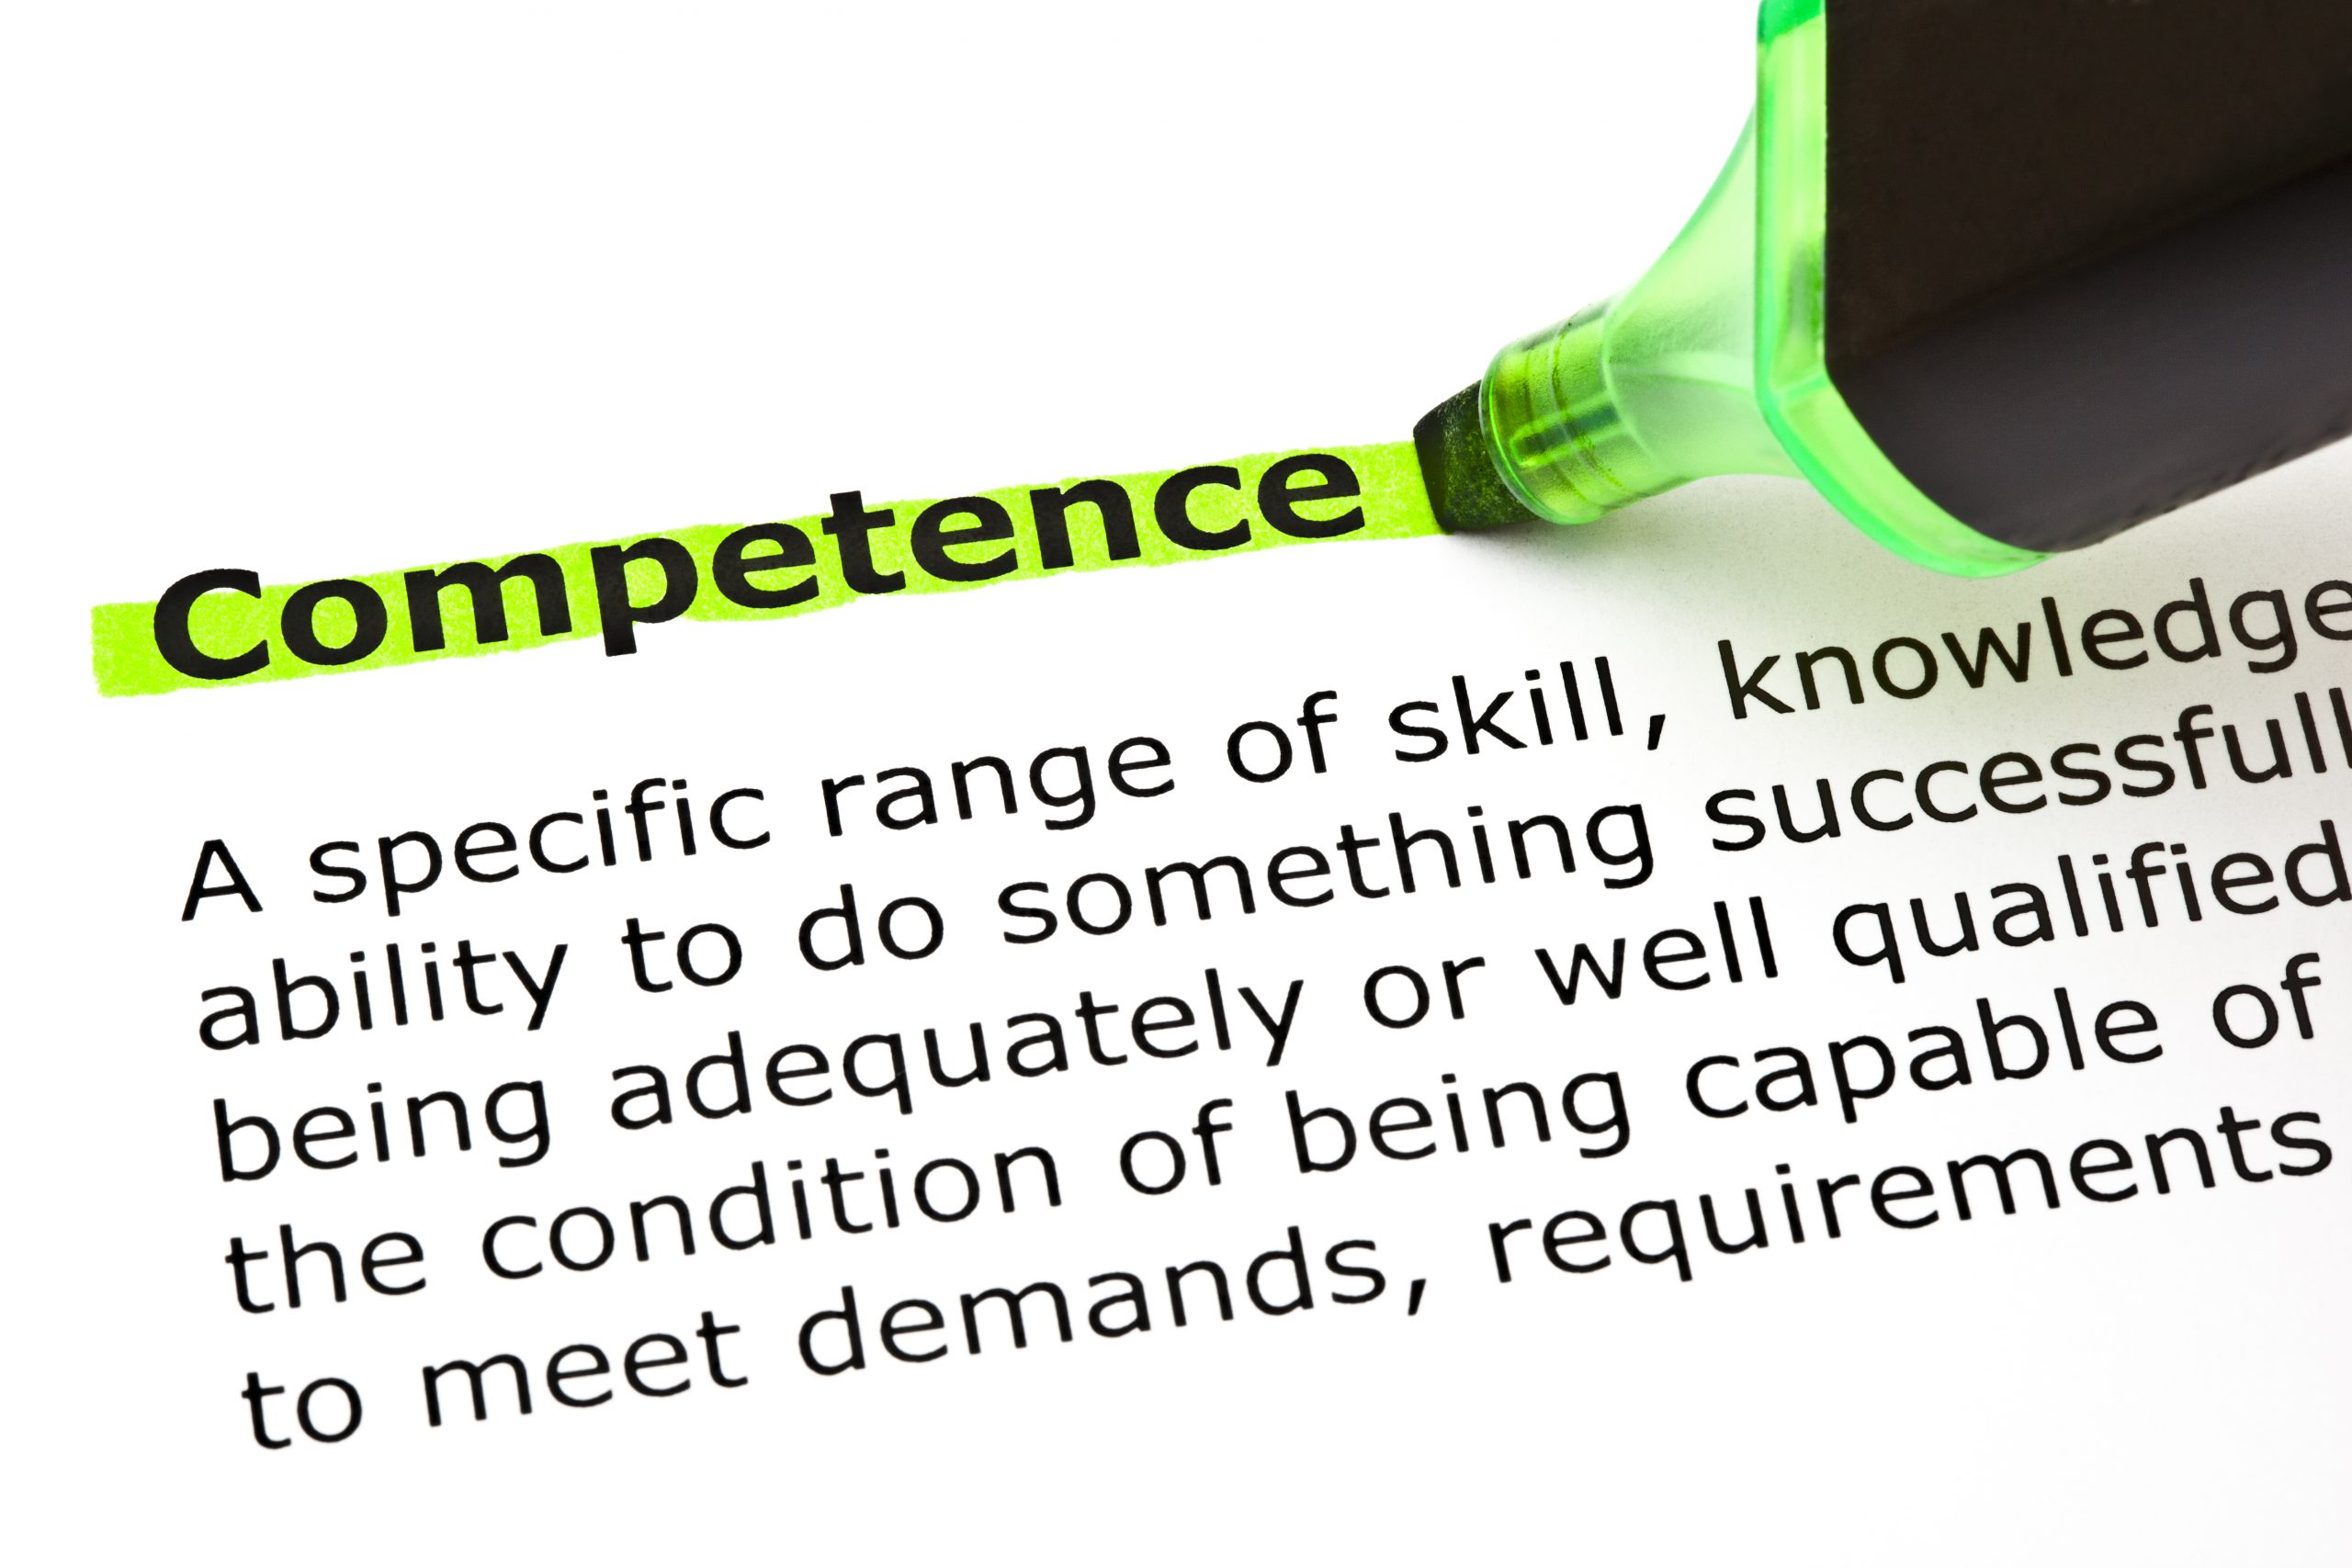 Definition of the word Competence highlighted in green with felt tip pen